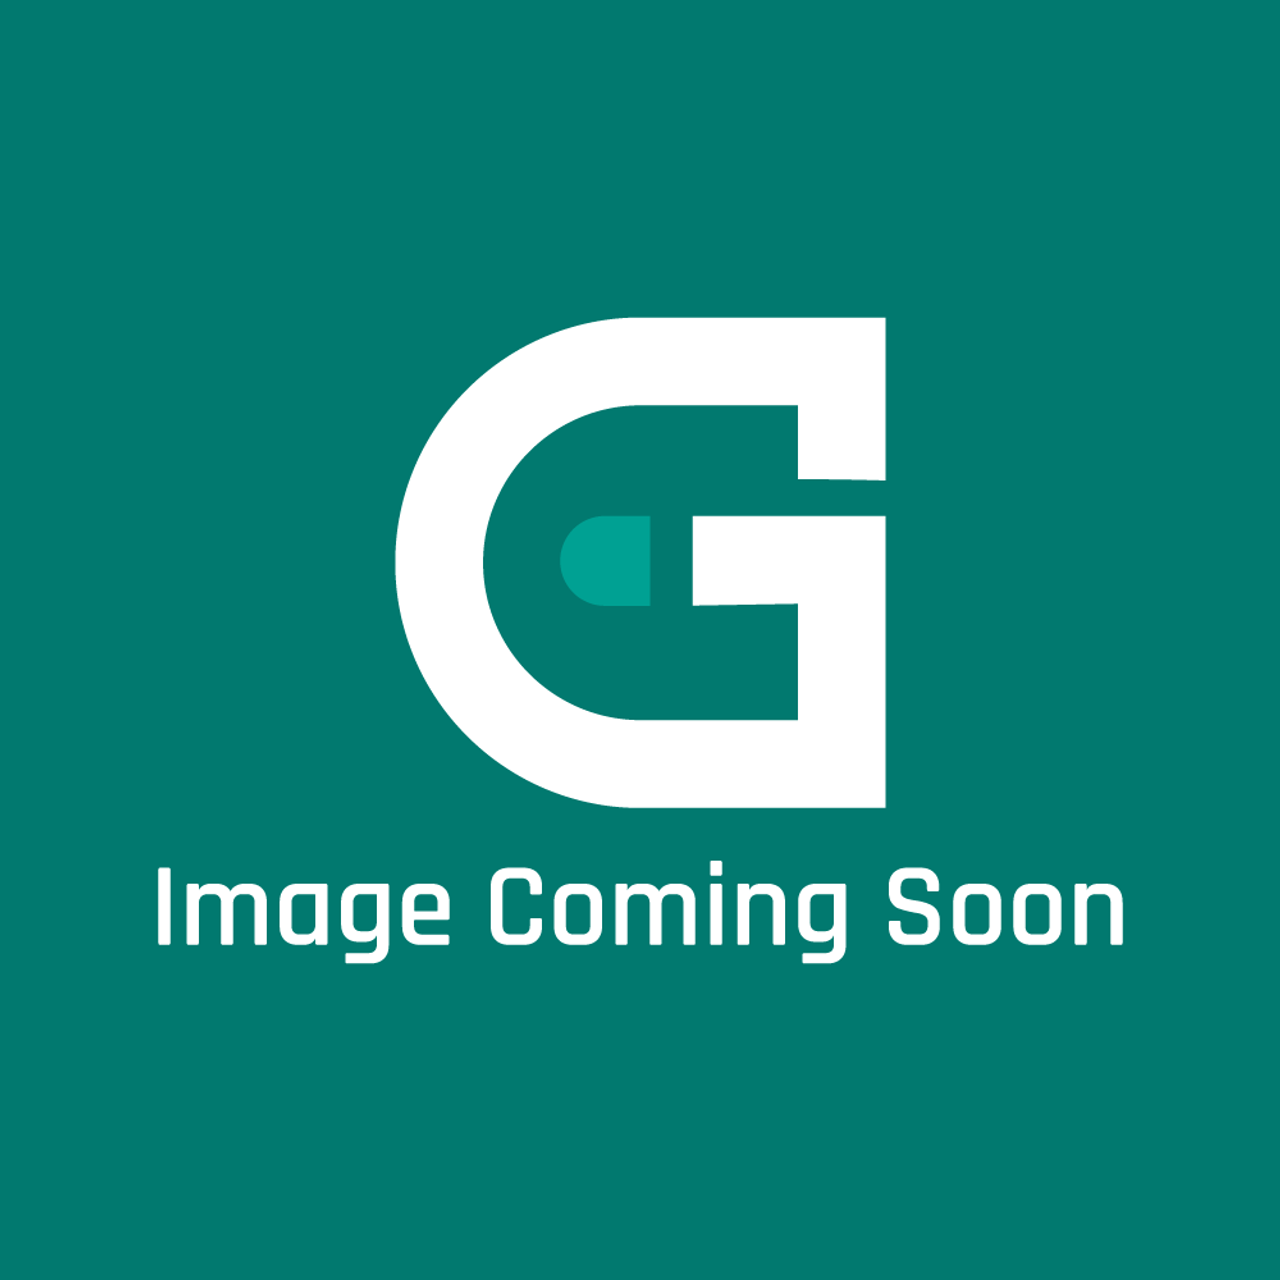 AGA Marvel A4446 - Ceramic Glass 6-4 Top 1228840 - Image Coming Soon!